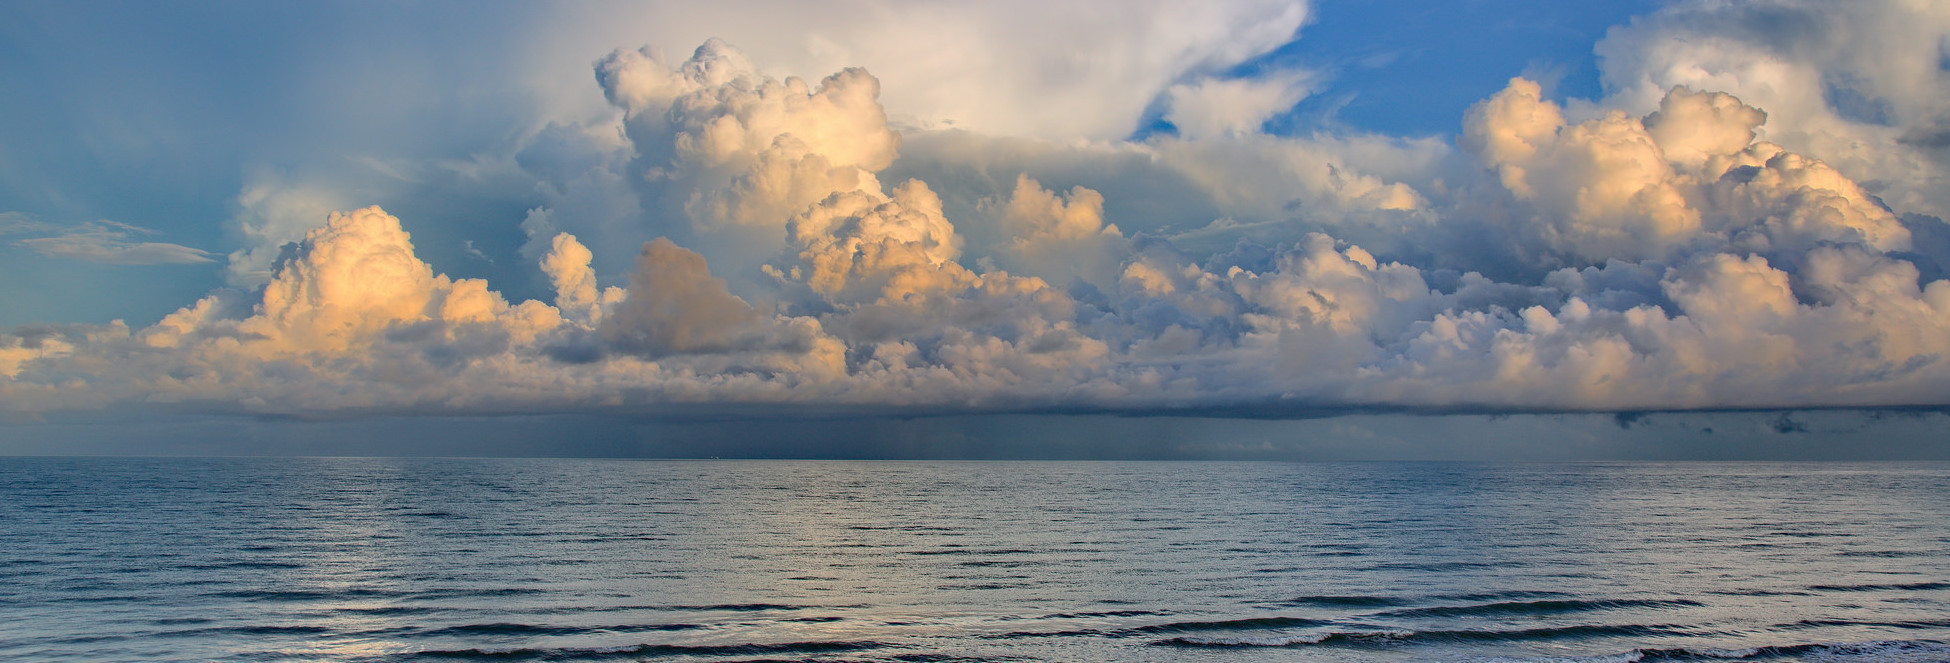 A storm passes over the Timor Sea. (Photo: Geoff Whalan/Flickr)